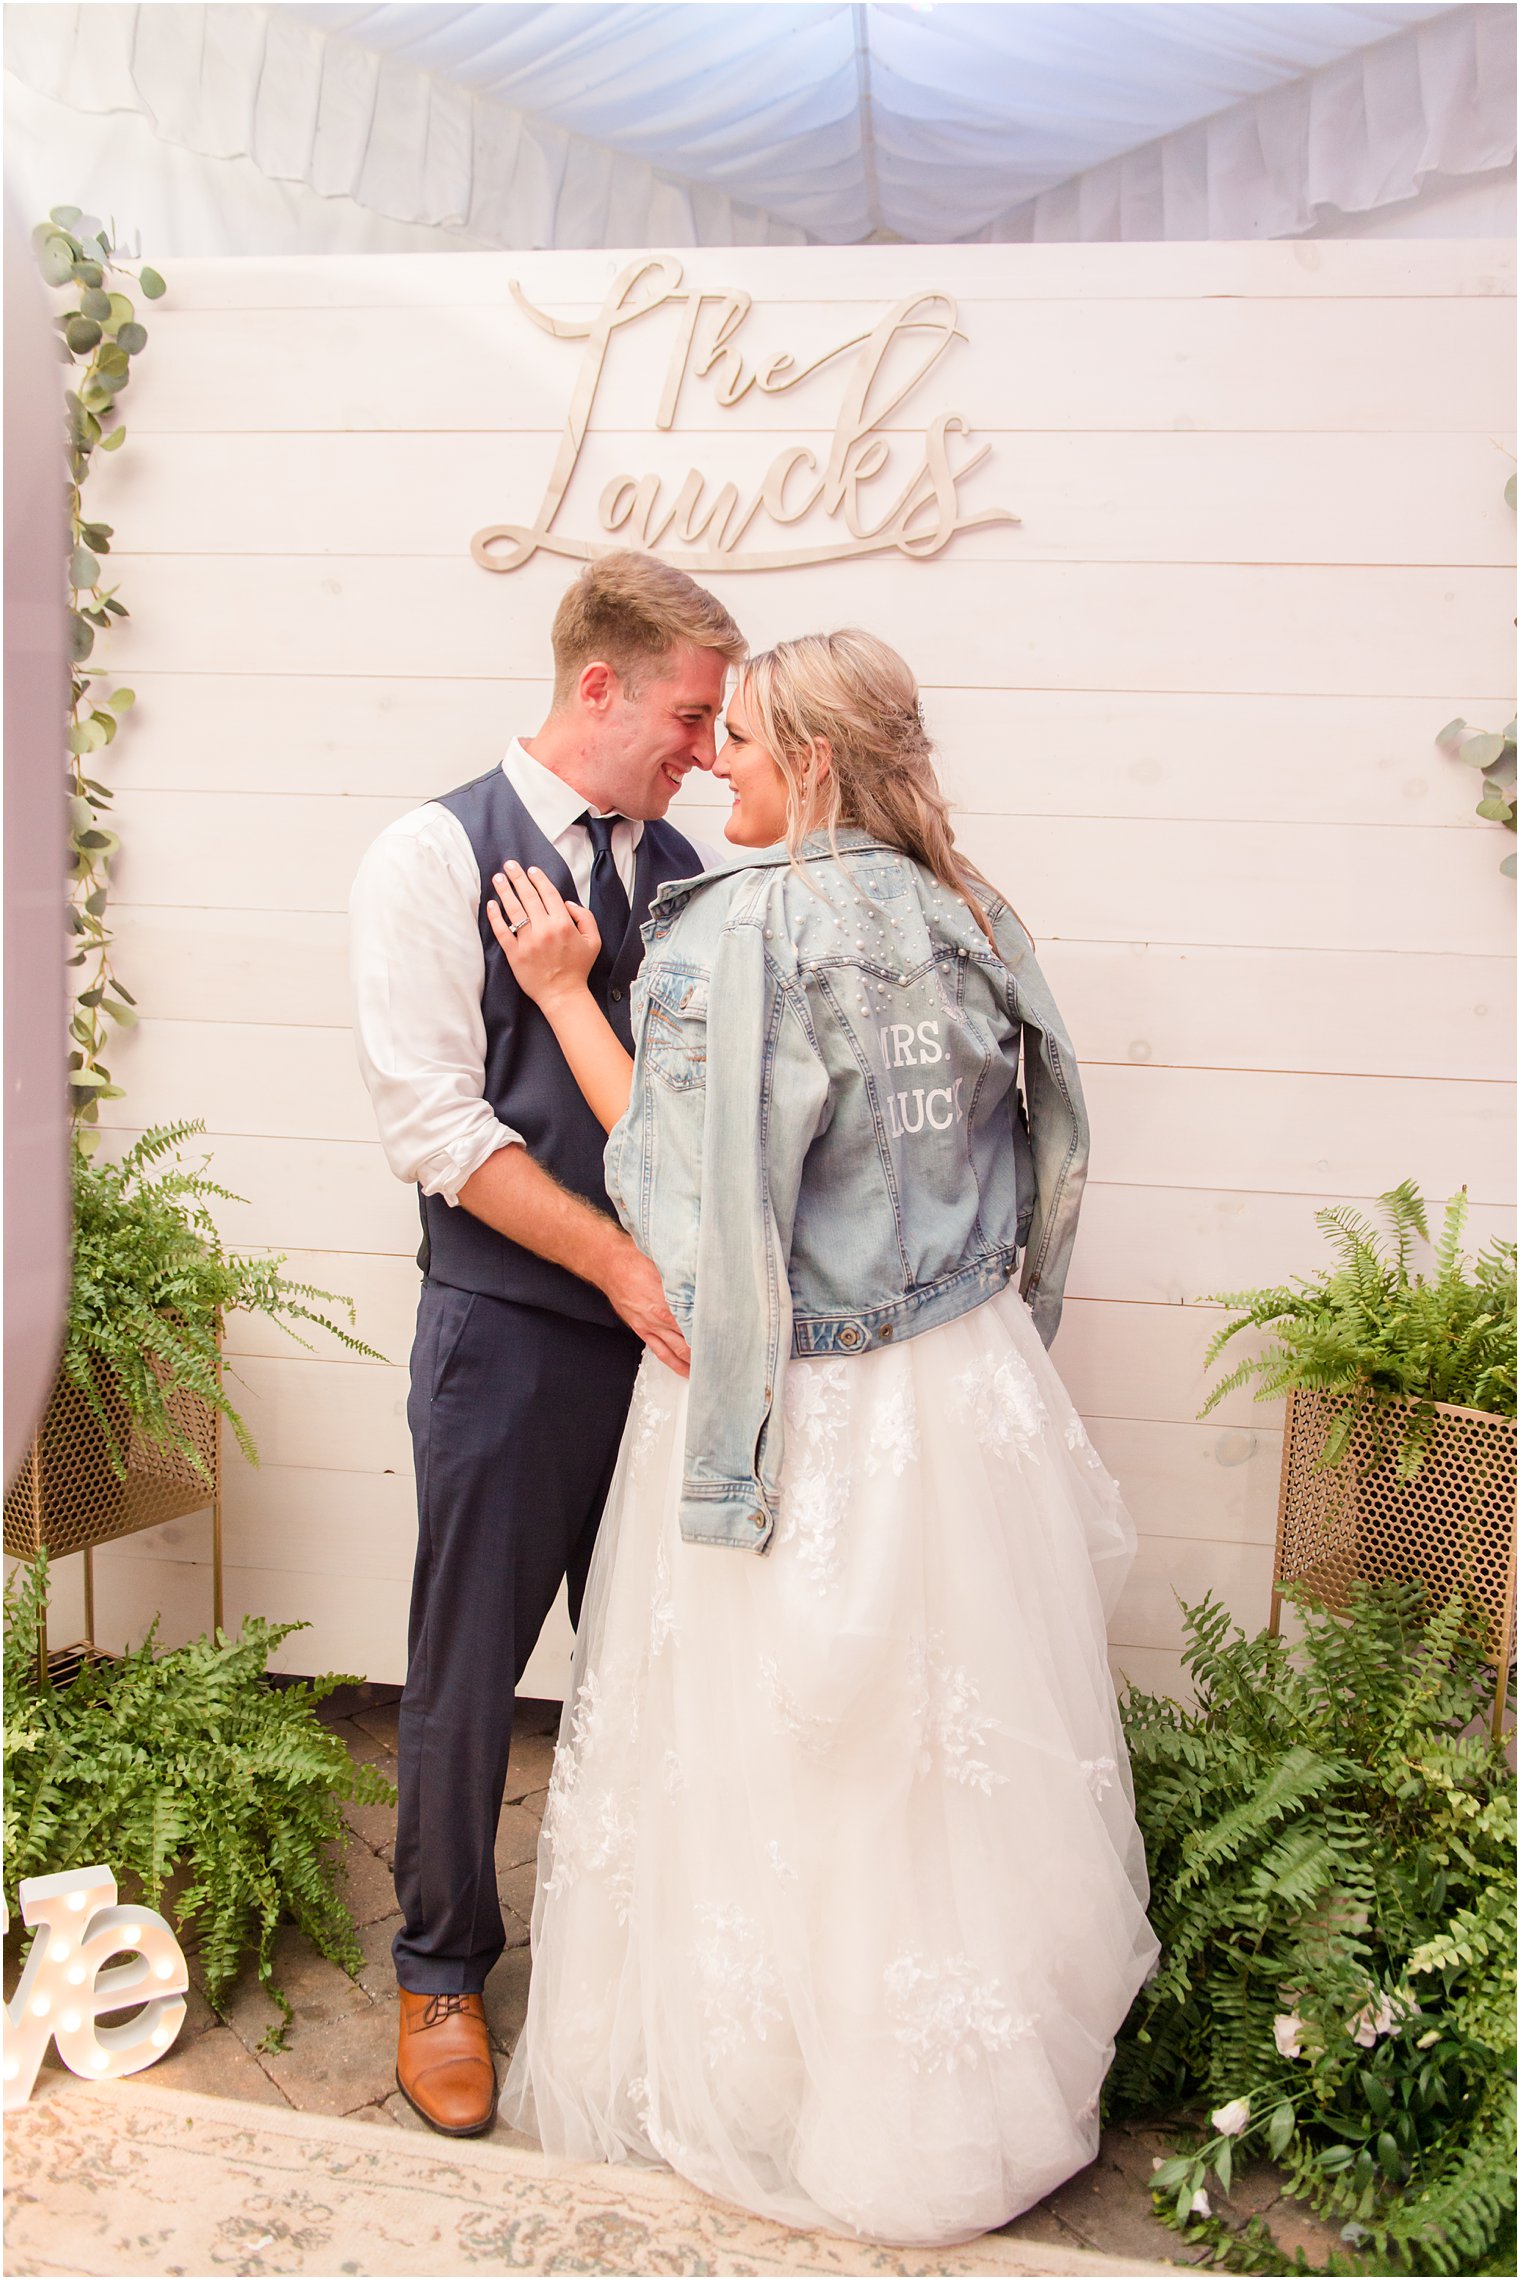 bride and groom pose by wooden wall with name